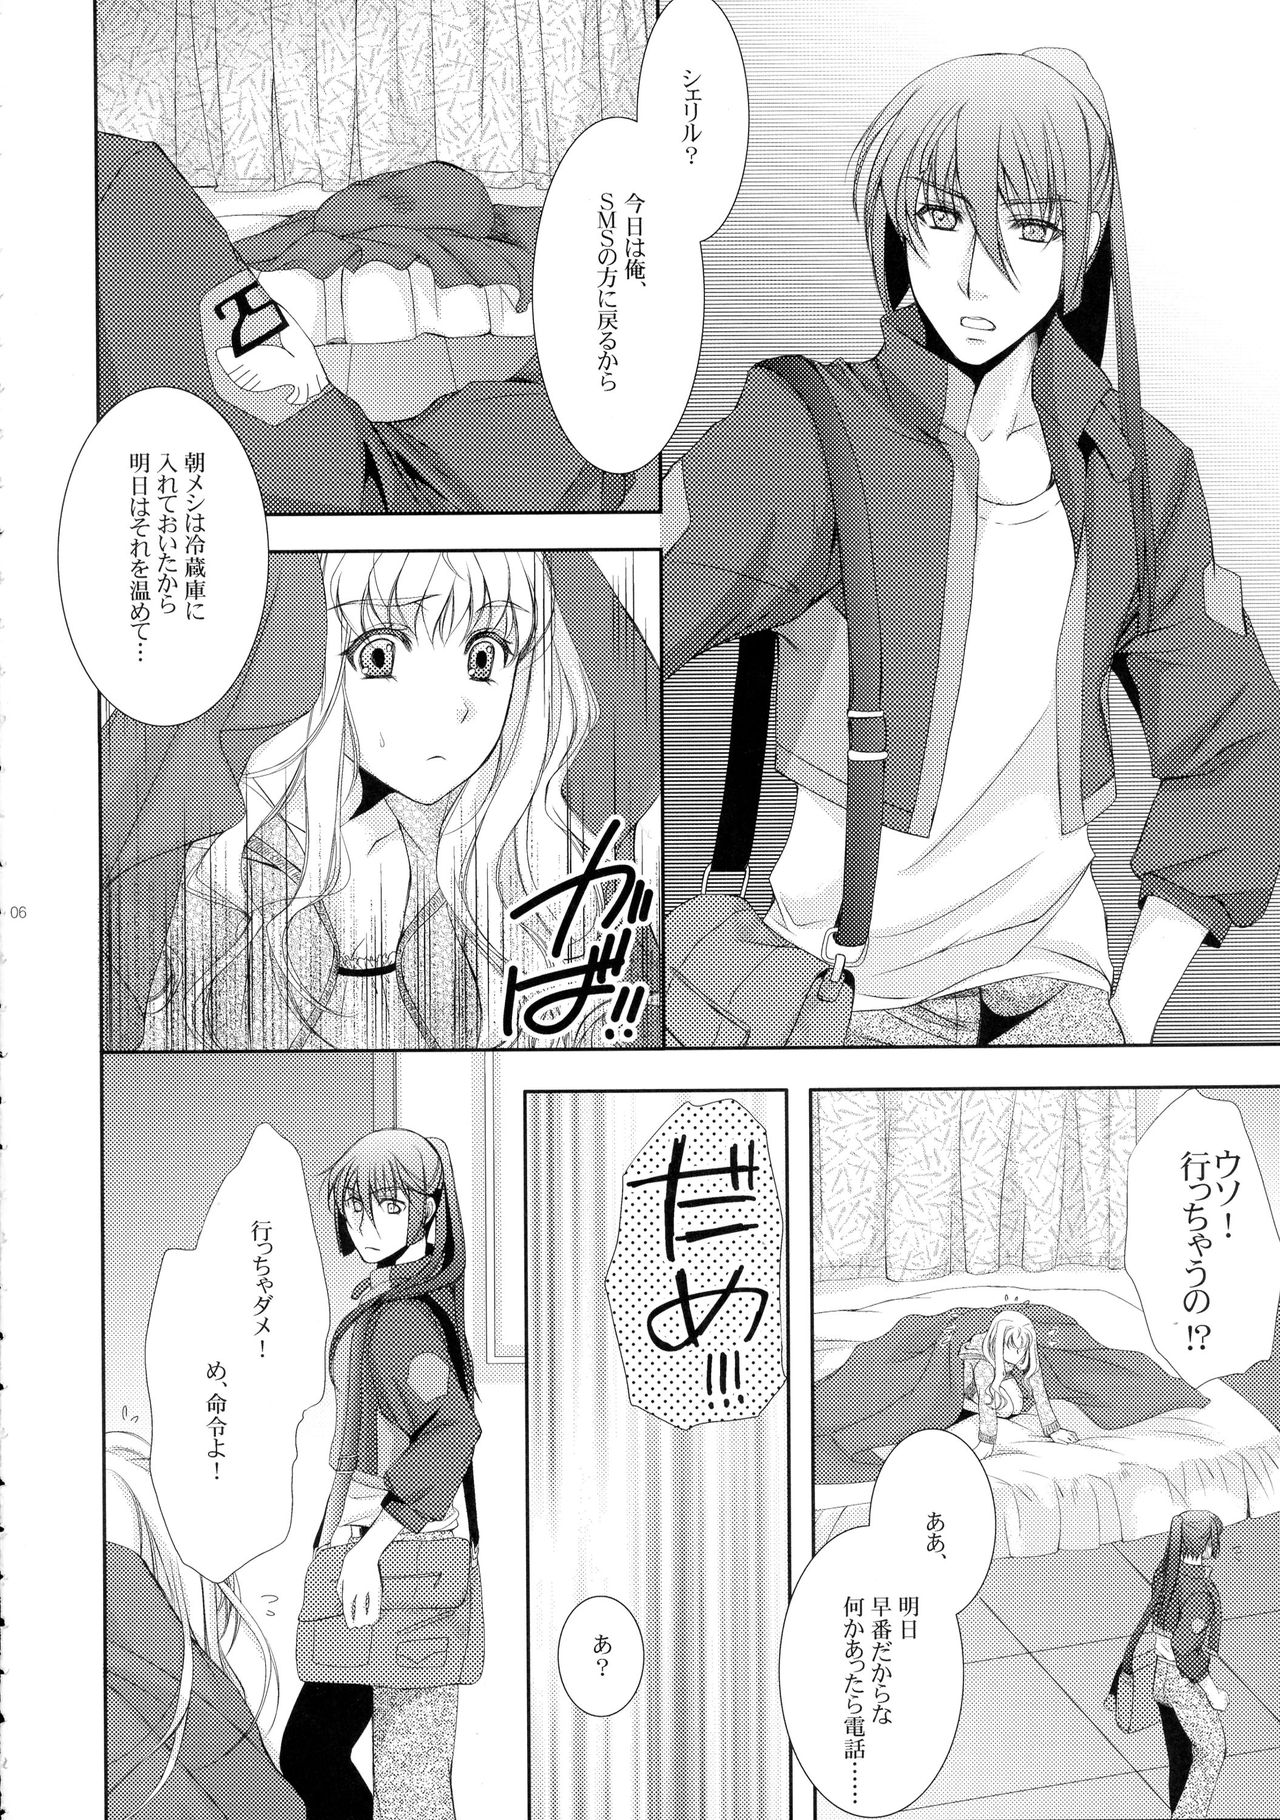 (C88) [LOVE ME DO (Natsume, Satou)] Wish List 2 (Macross Frontier) page 6 full